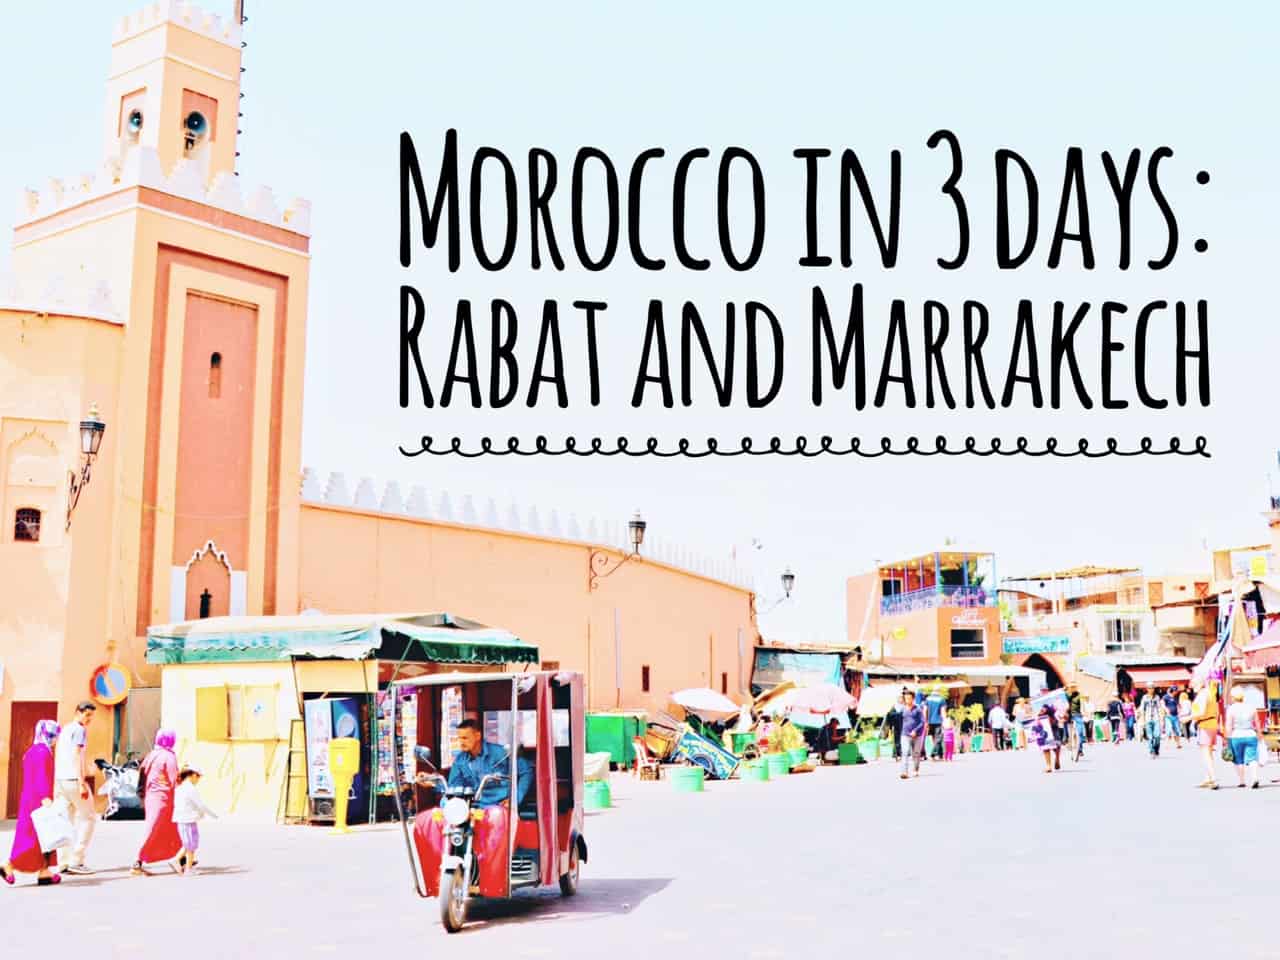 From Rabat to Marrakech by train: Morocco in 3 days